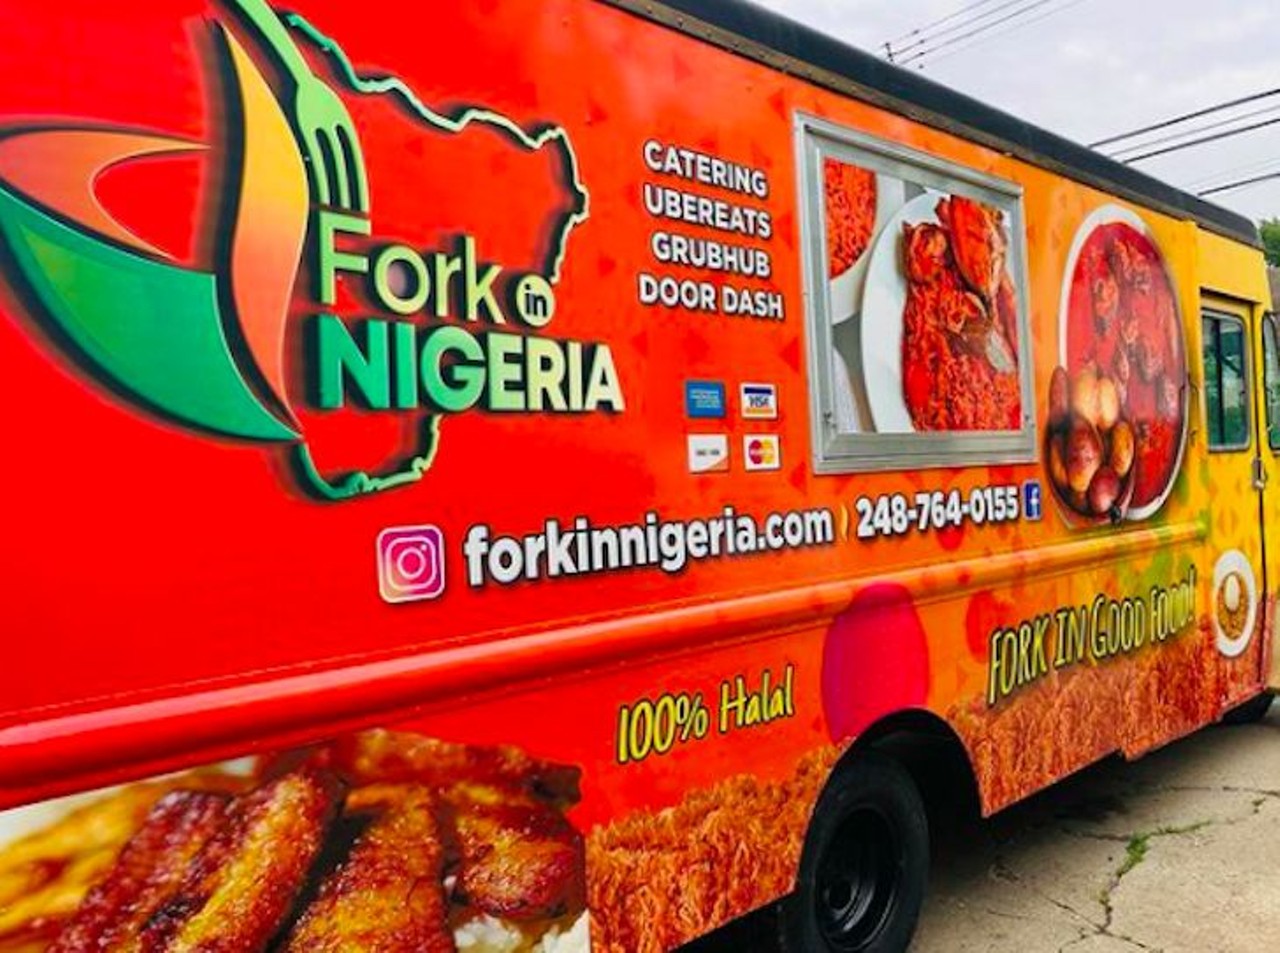 Fork in Nigeria
forkinnigeria.com
Serving up traditional Nigerian classics like Fufu, Egusi, and Jollof,  Fork in Nigeria lets you travel across the globe without leaving the city. 
Photo via Fork in Nigeria/Instagram